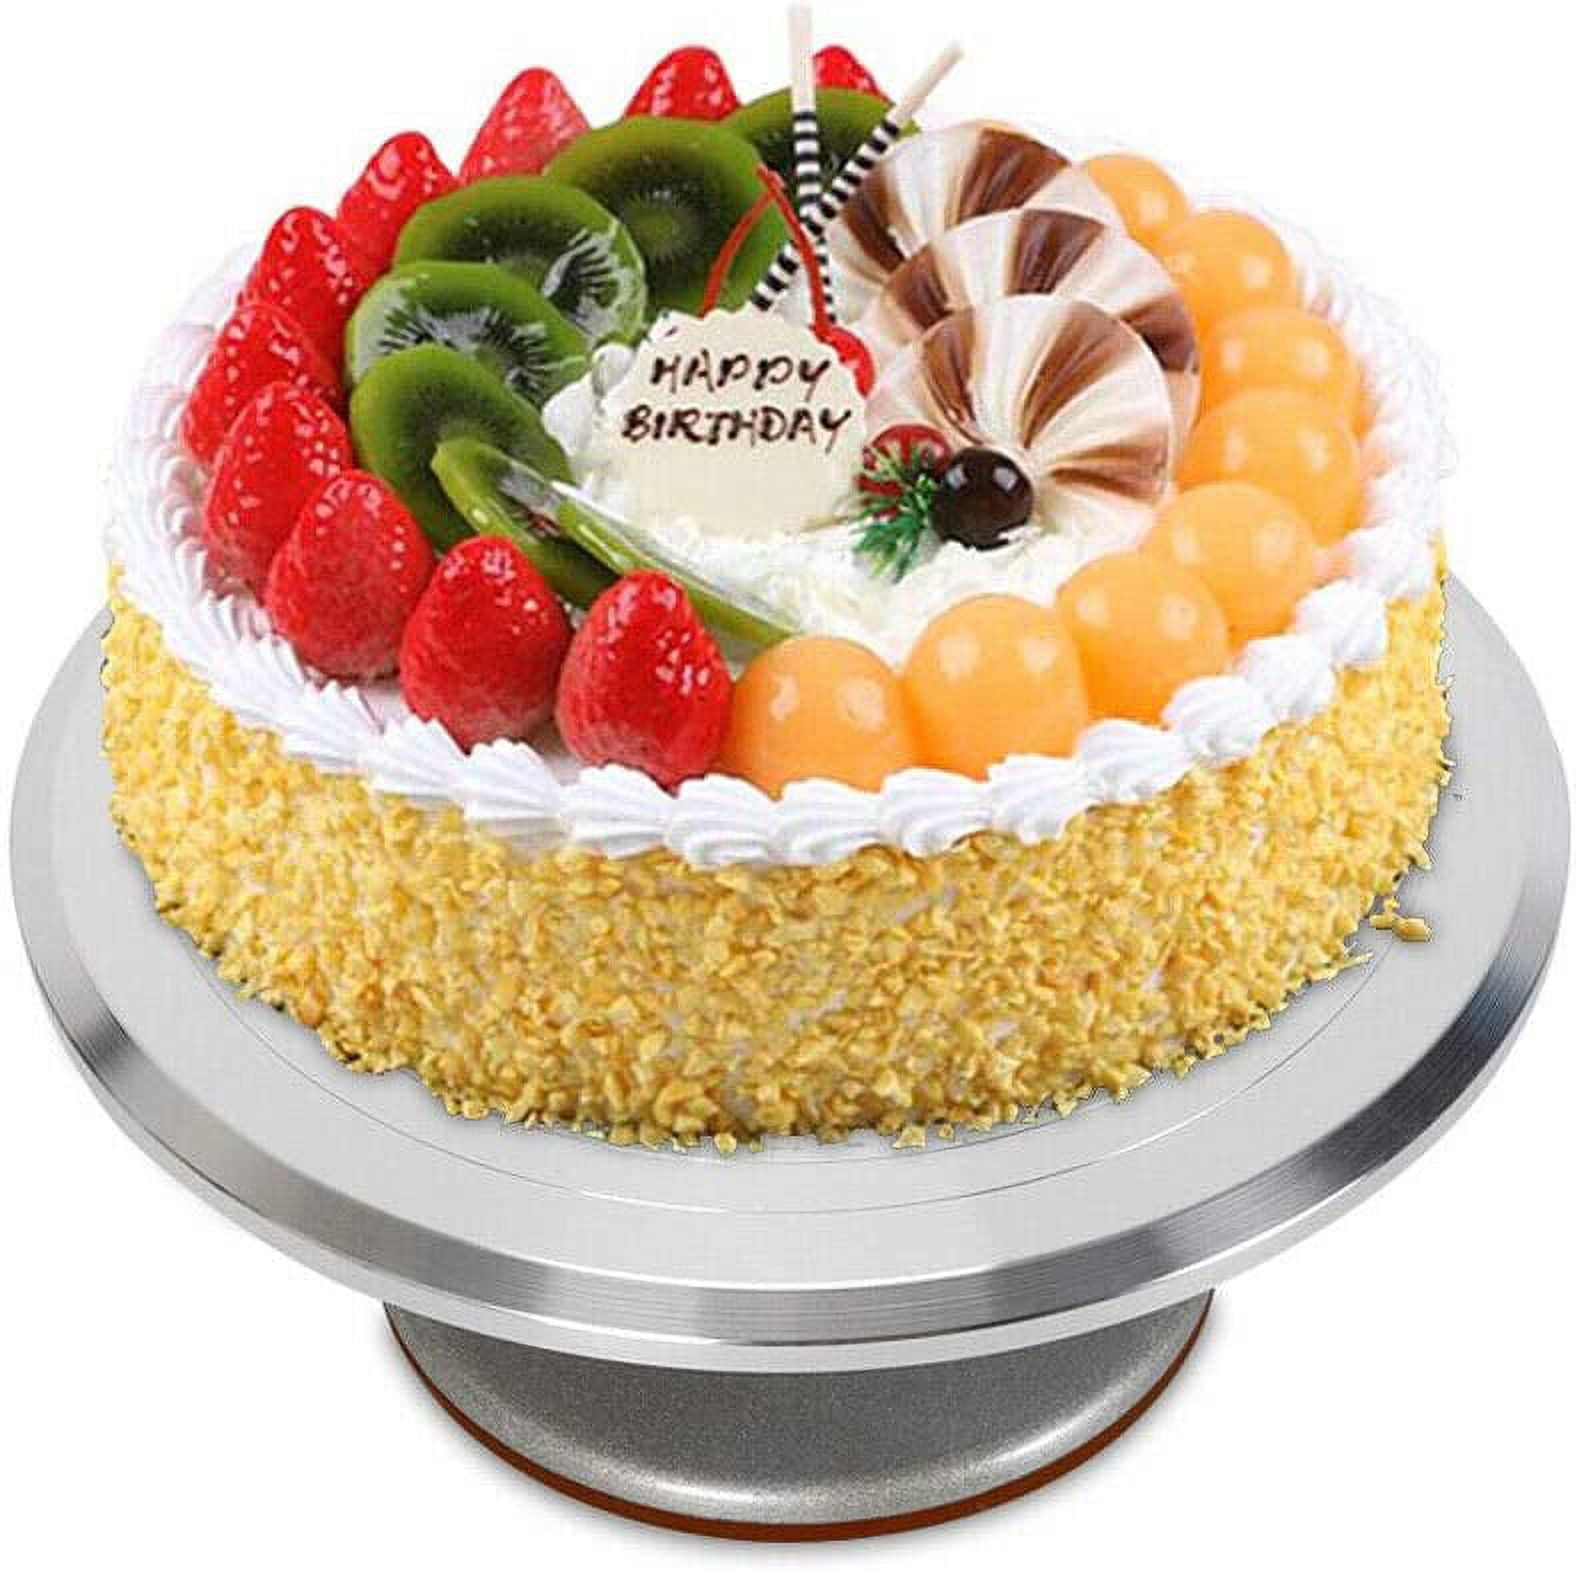 ForeverSmooth™ 12 Inch Cake Turntable and Decorating Supplies Gift